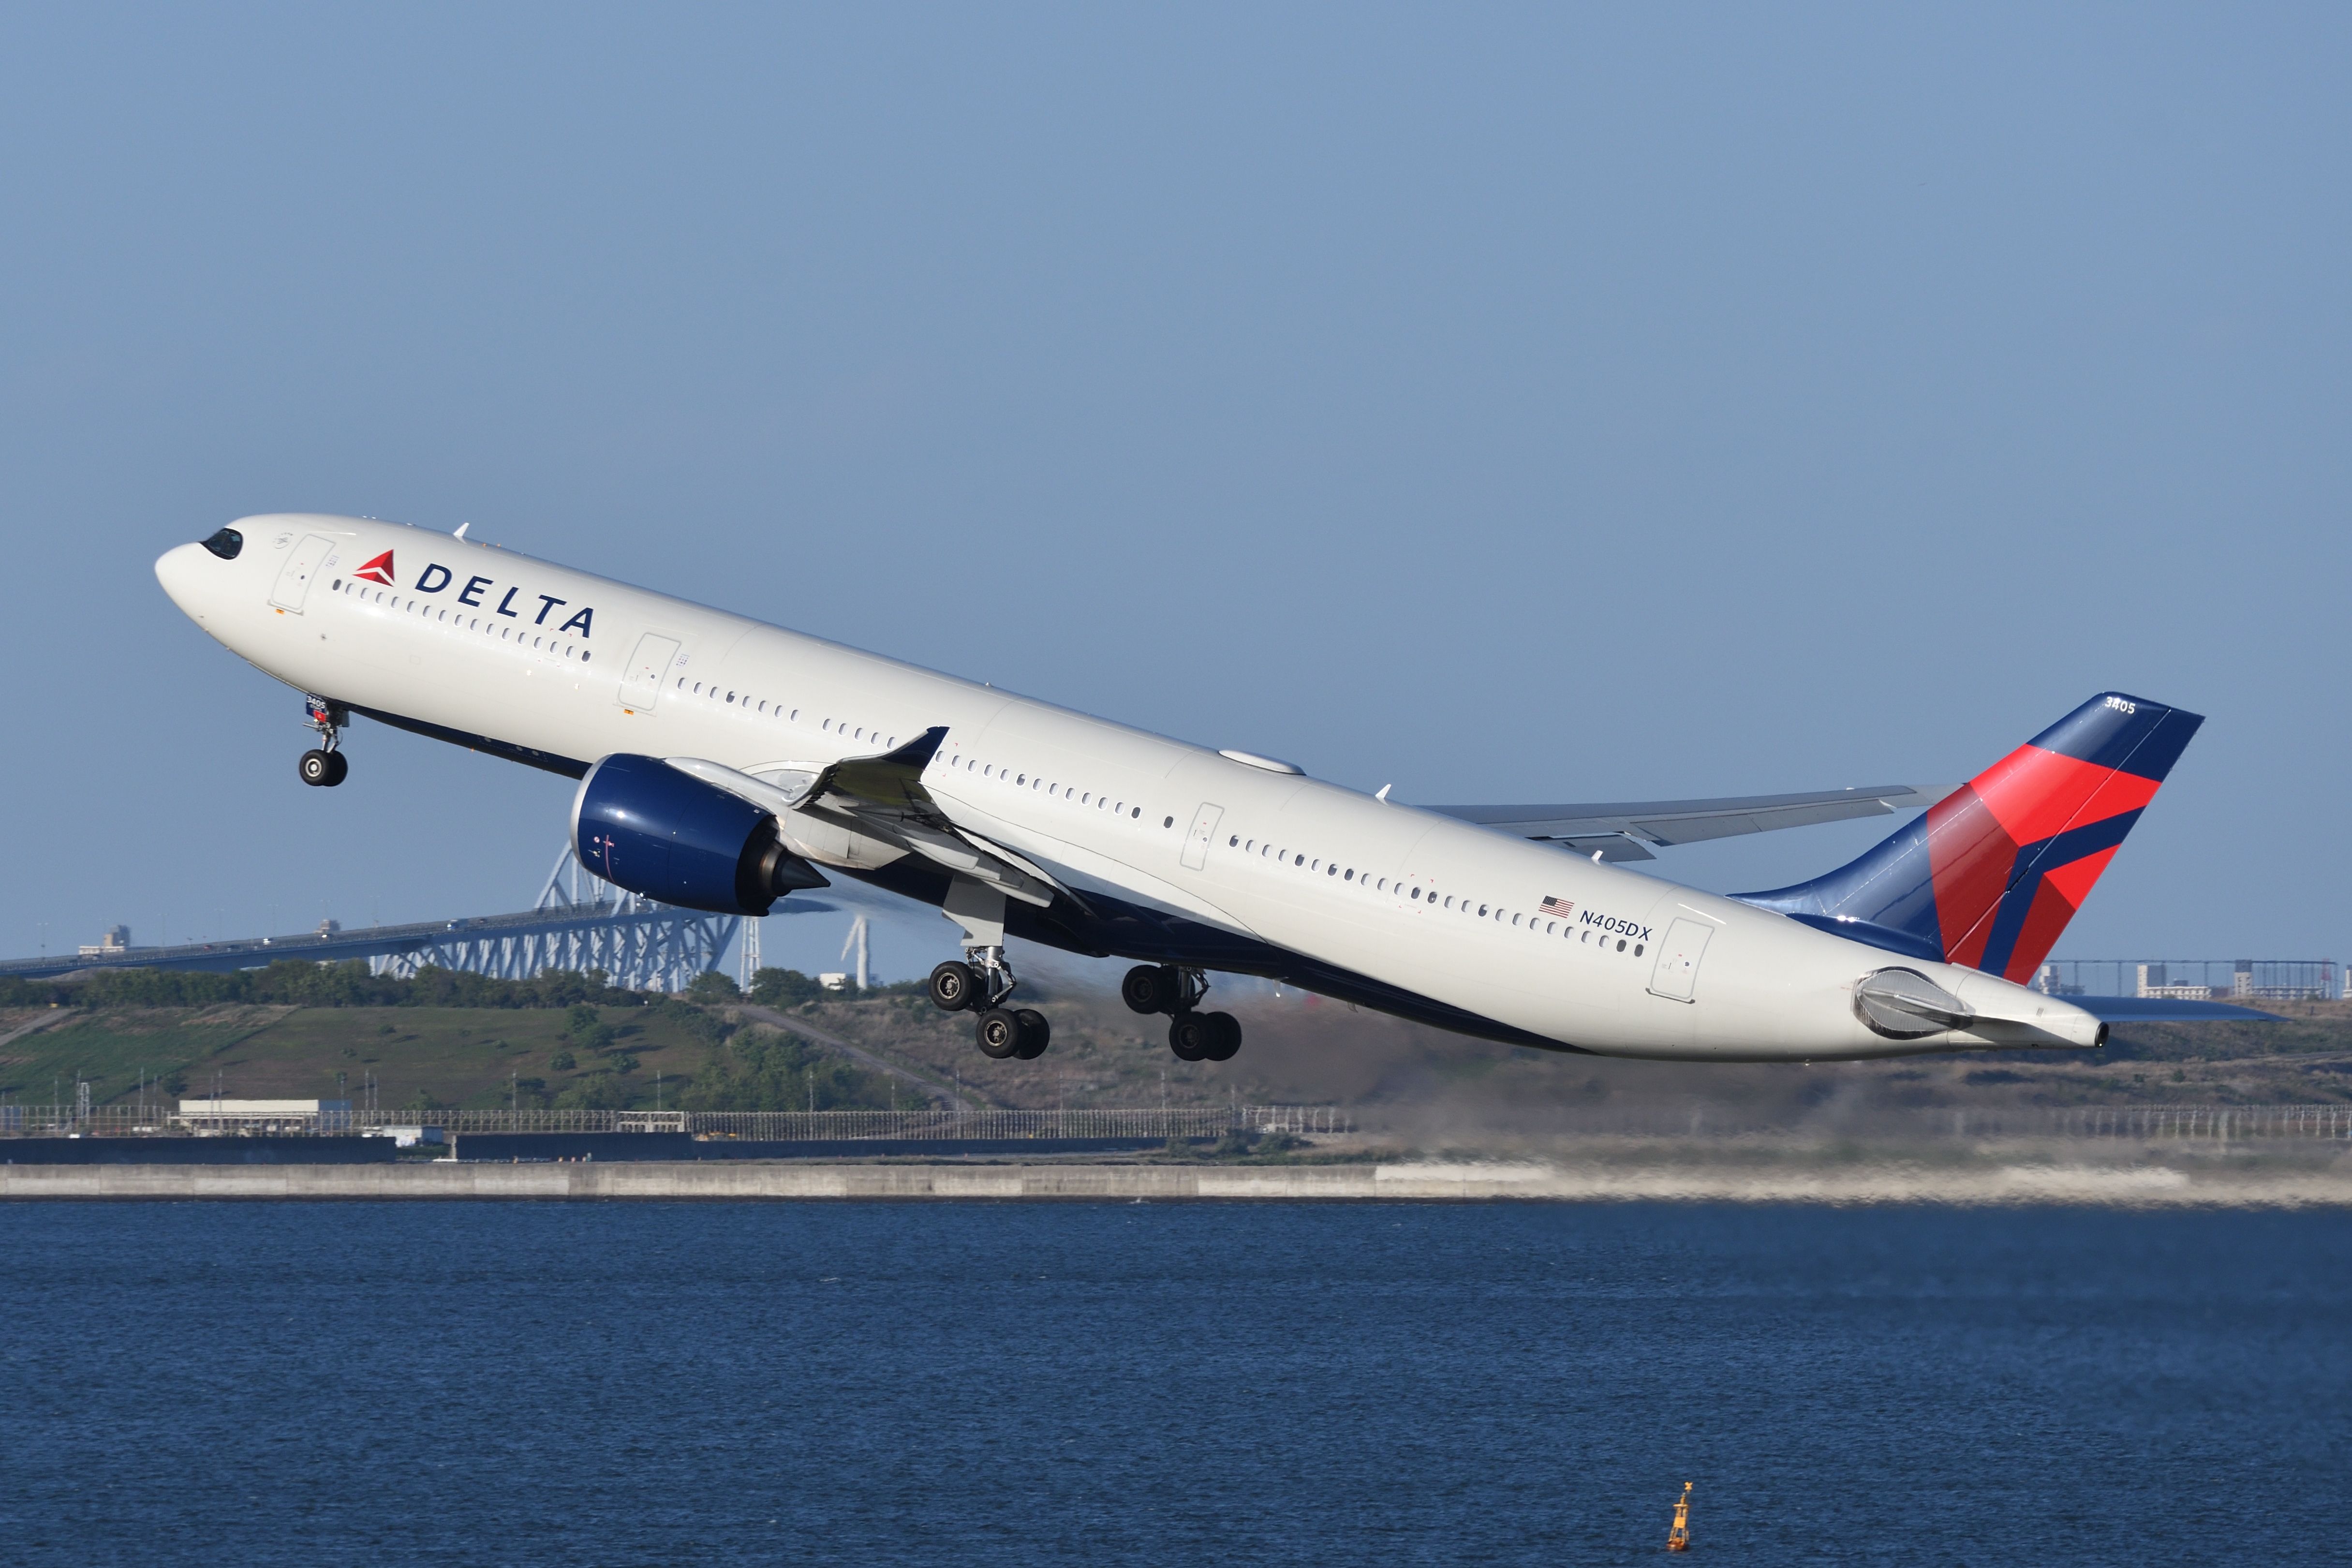 Delta Air Lines Airbus A330-900neo (N405DX) taking off from Tokyo, Japan.